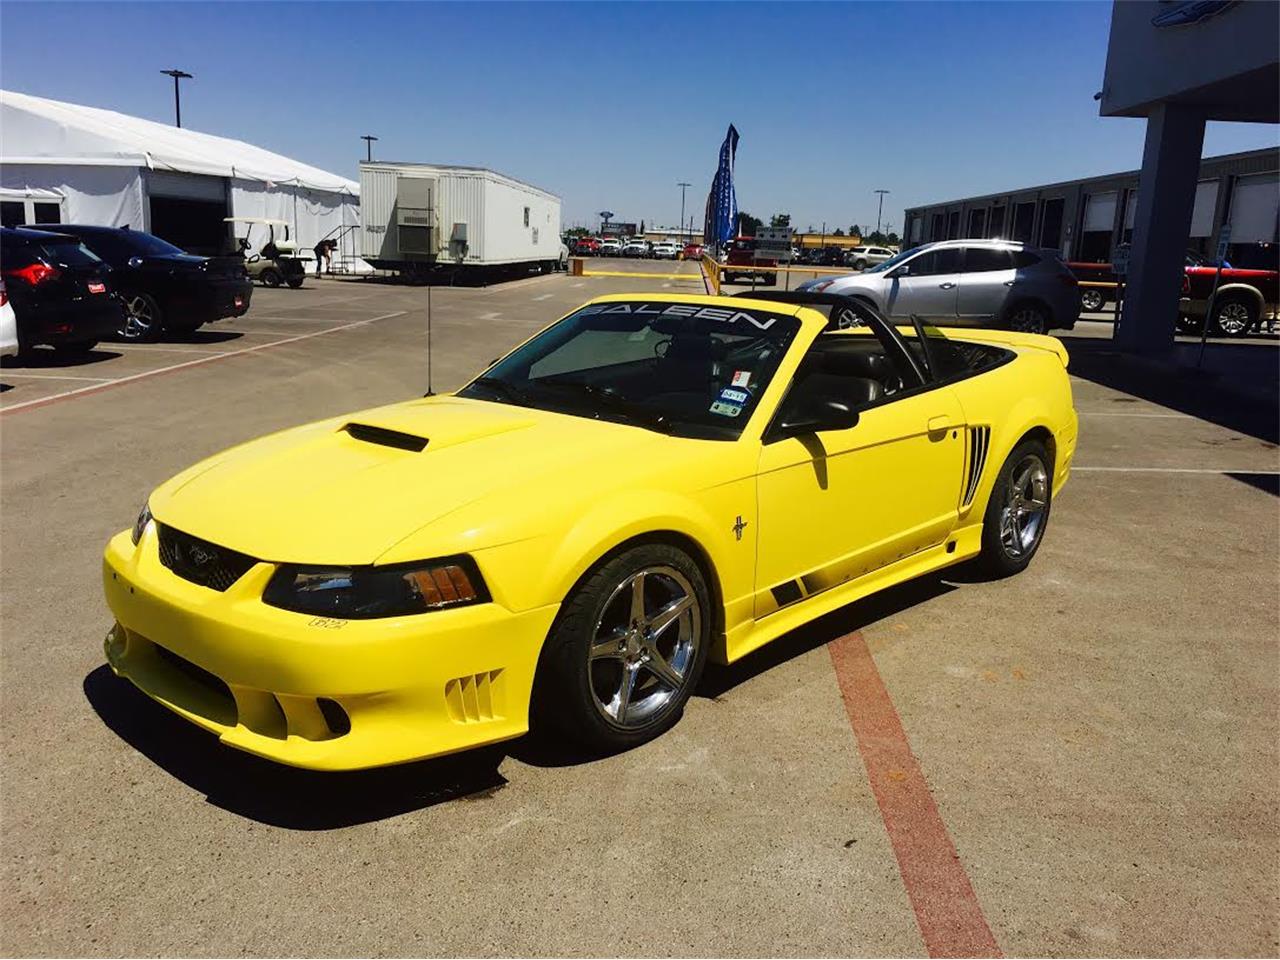 2001 Ford Mustang (Saleen) for Sale | ClassicCars.com | CC ...